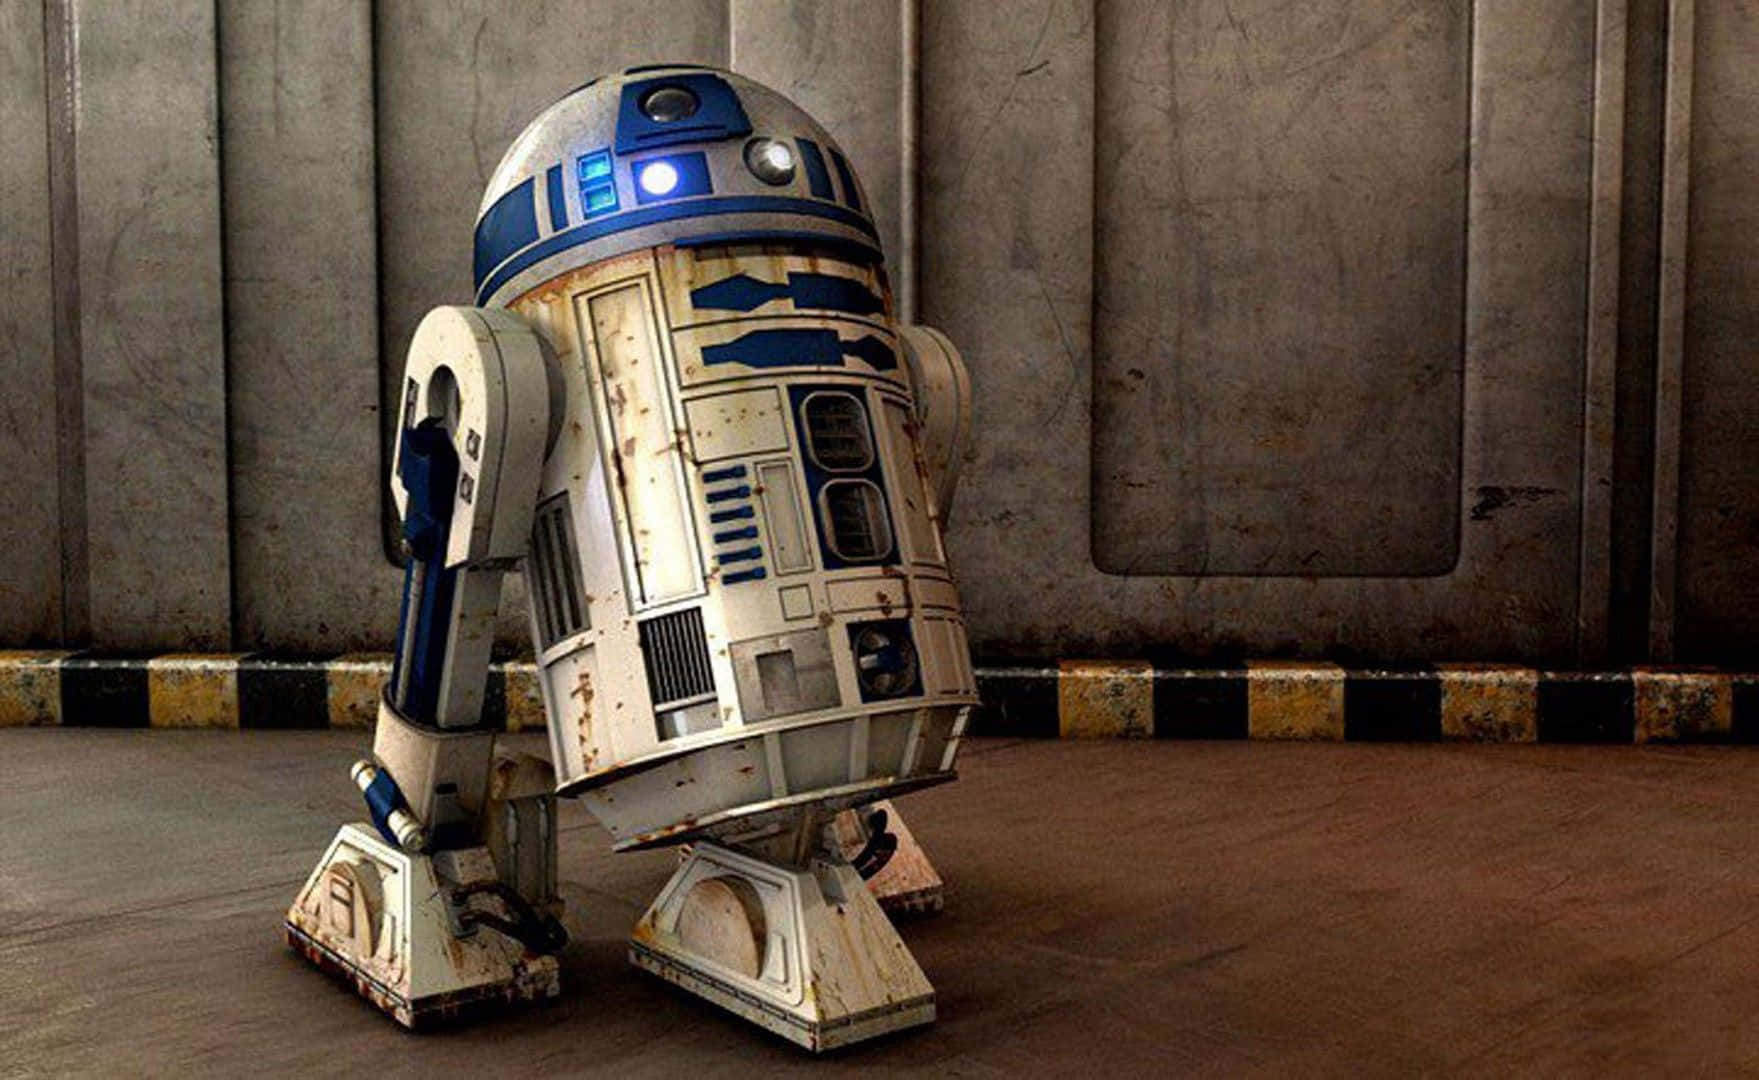 R2-D2, the iconic droid from the Star Wars franchise Wallpaper